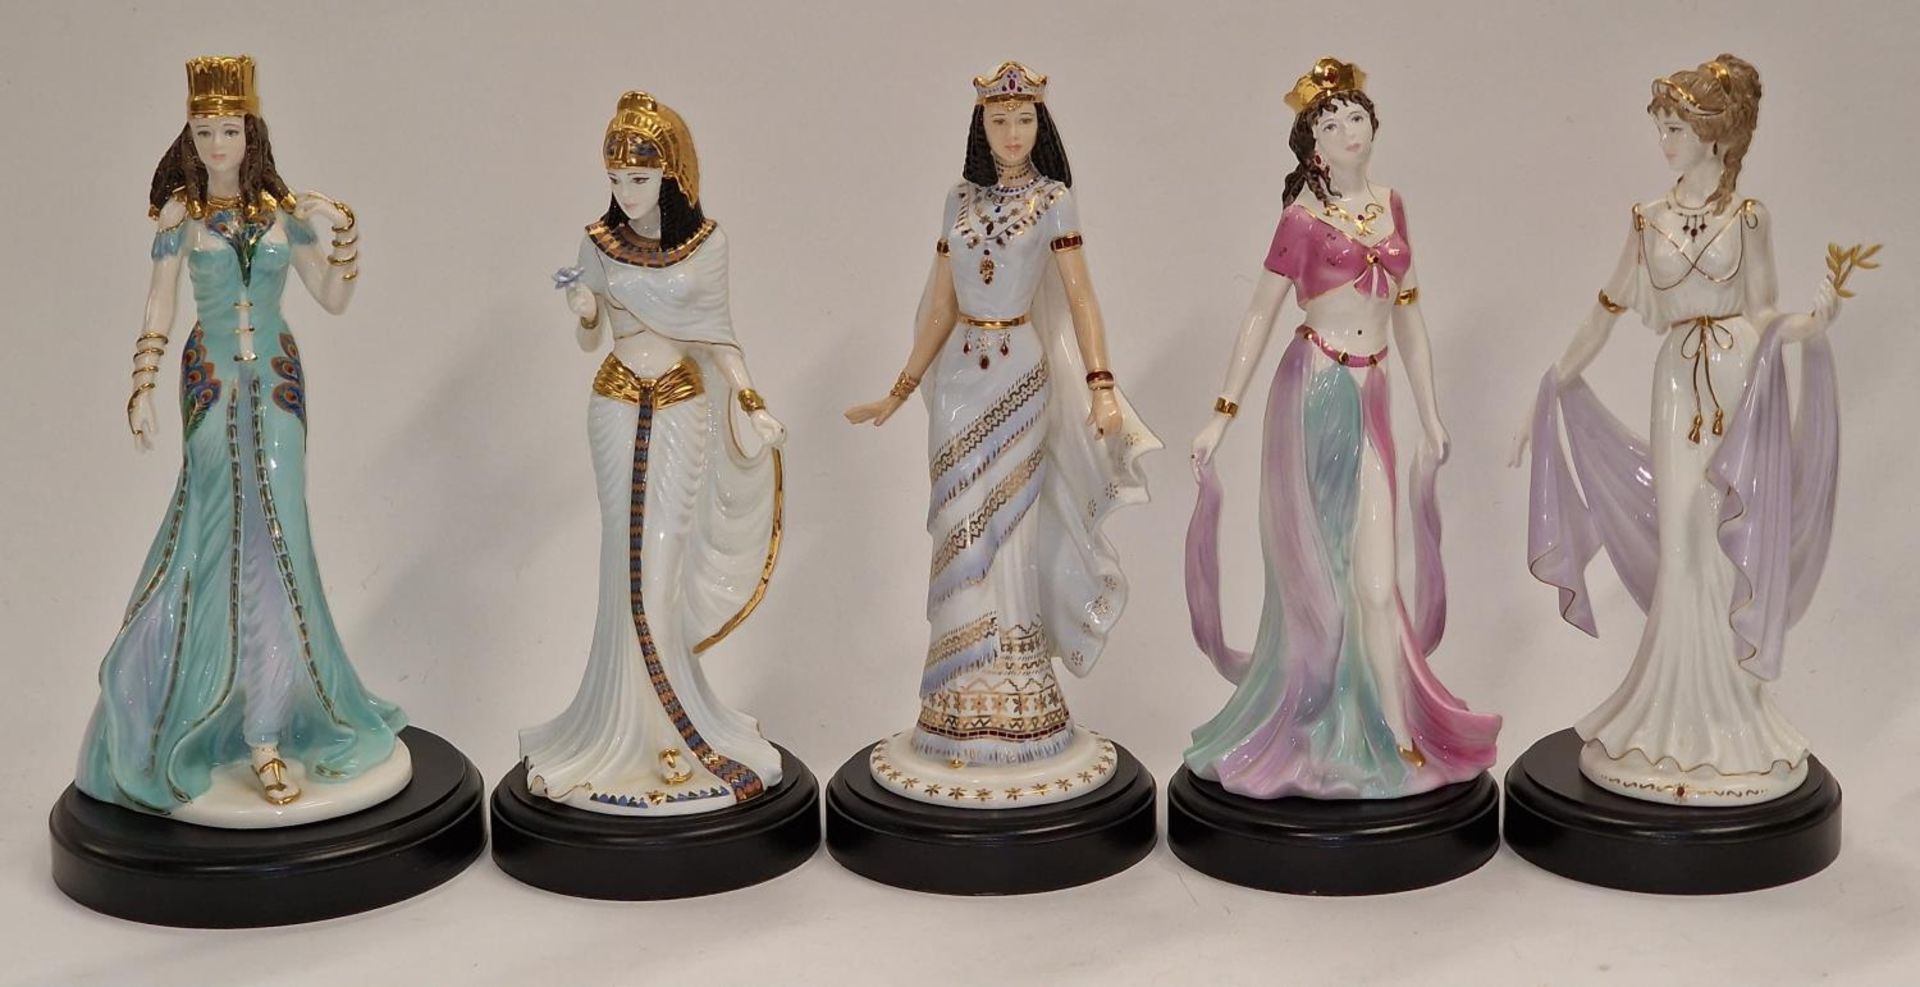 Coalport limited edition collection of David Cornell figurines on wooden bases (5).